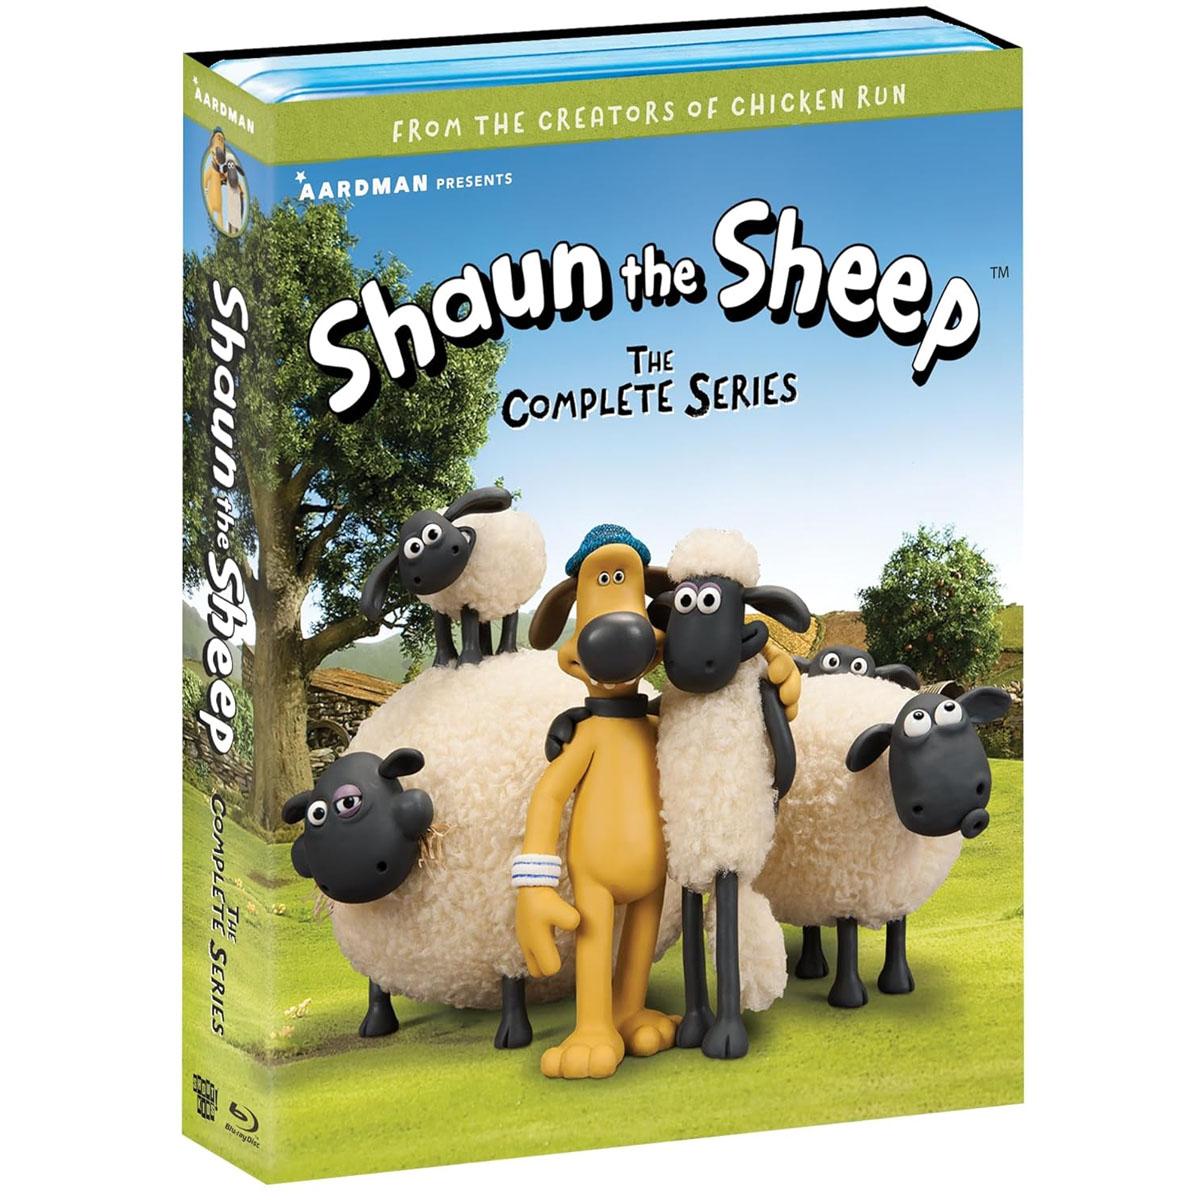 Shaun the Sheep The Complete Series Blu-ray for $26.24